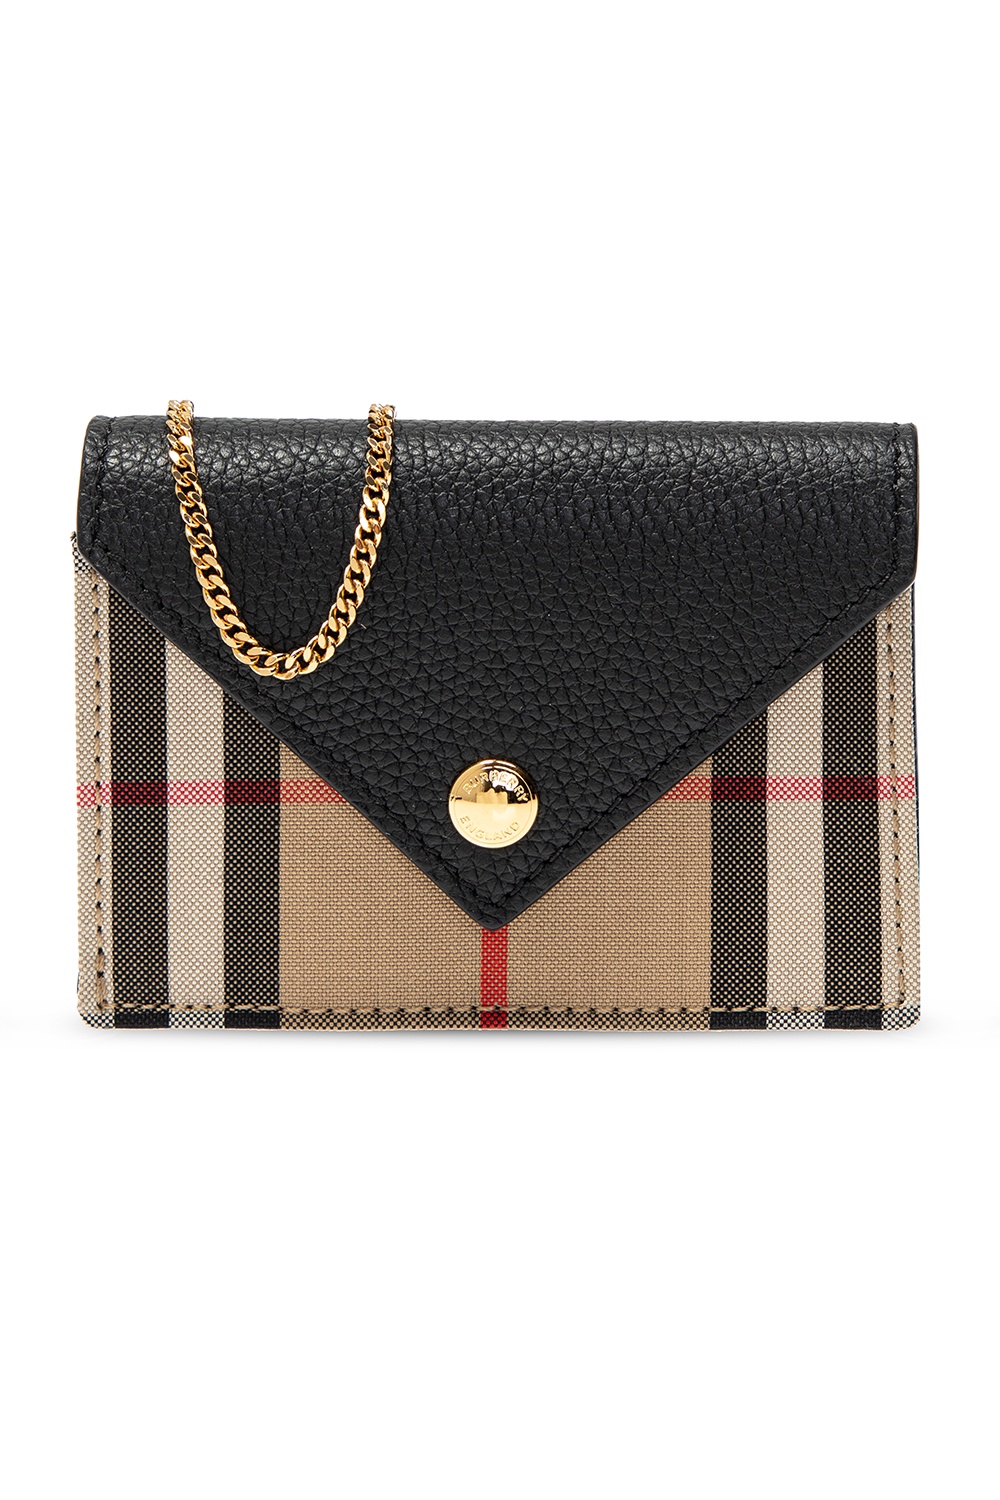 Burberry Card case on chain, Women's Accessories